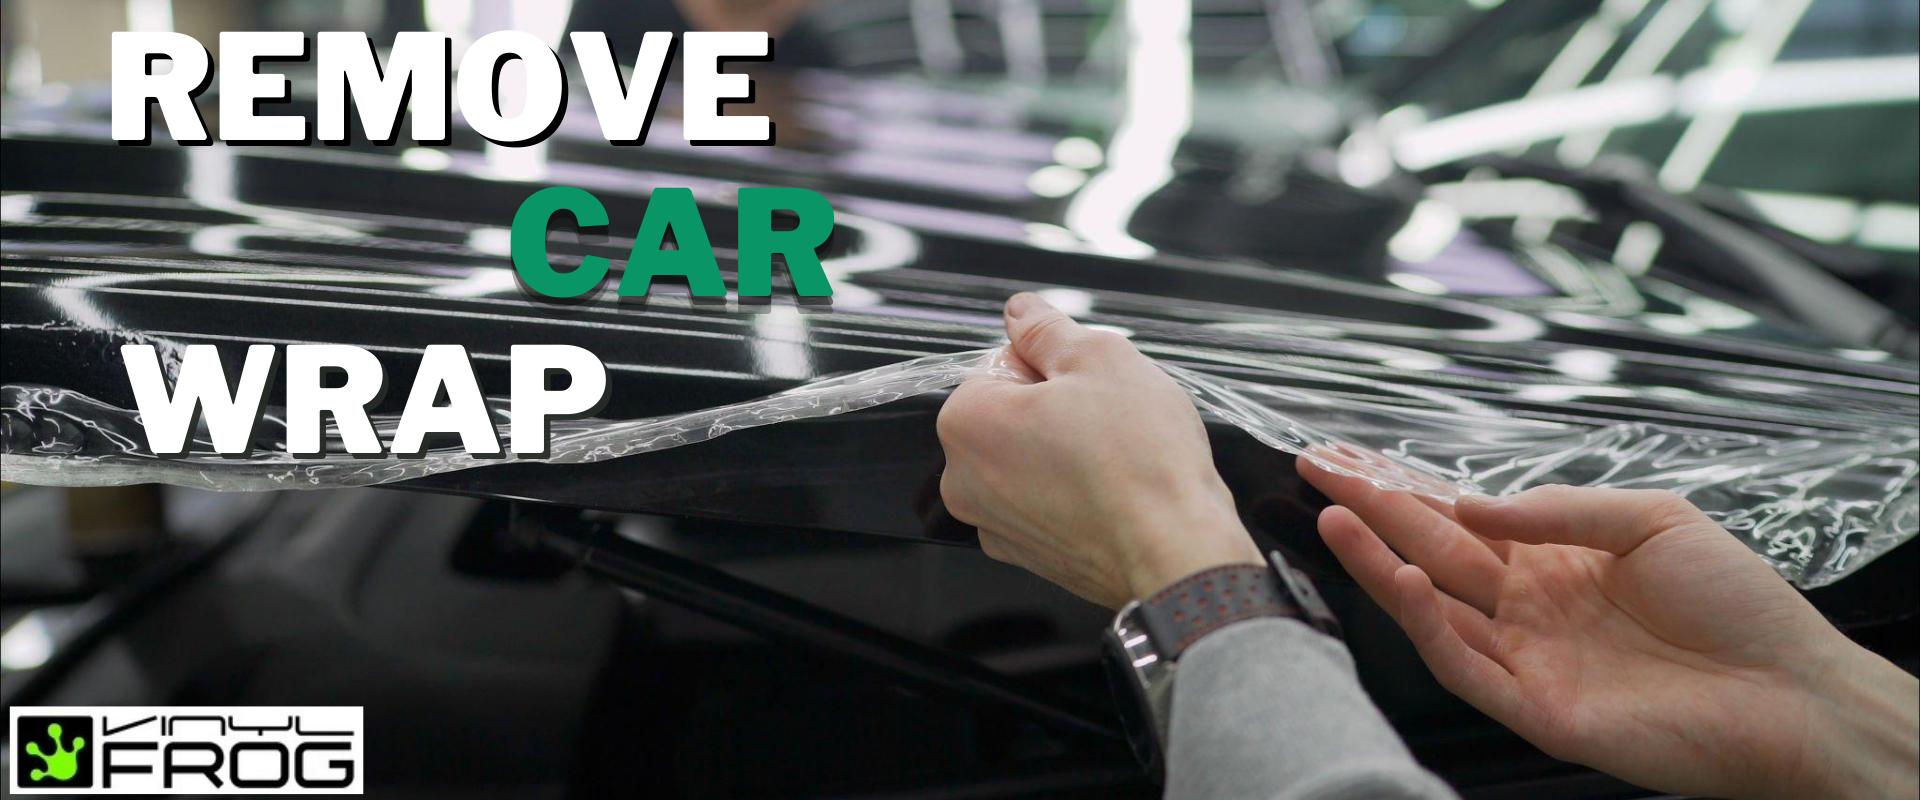 5 smart ways to apply and remove car decals - Professional